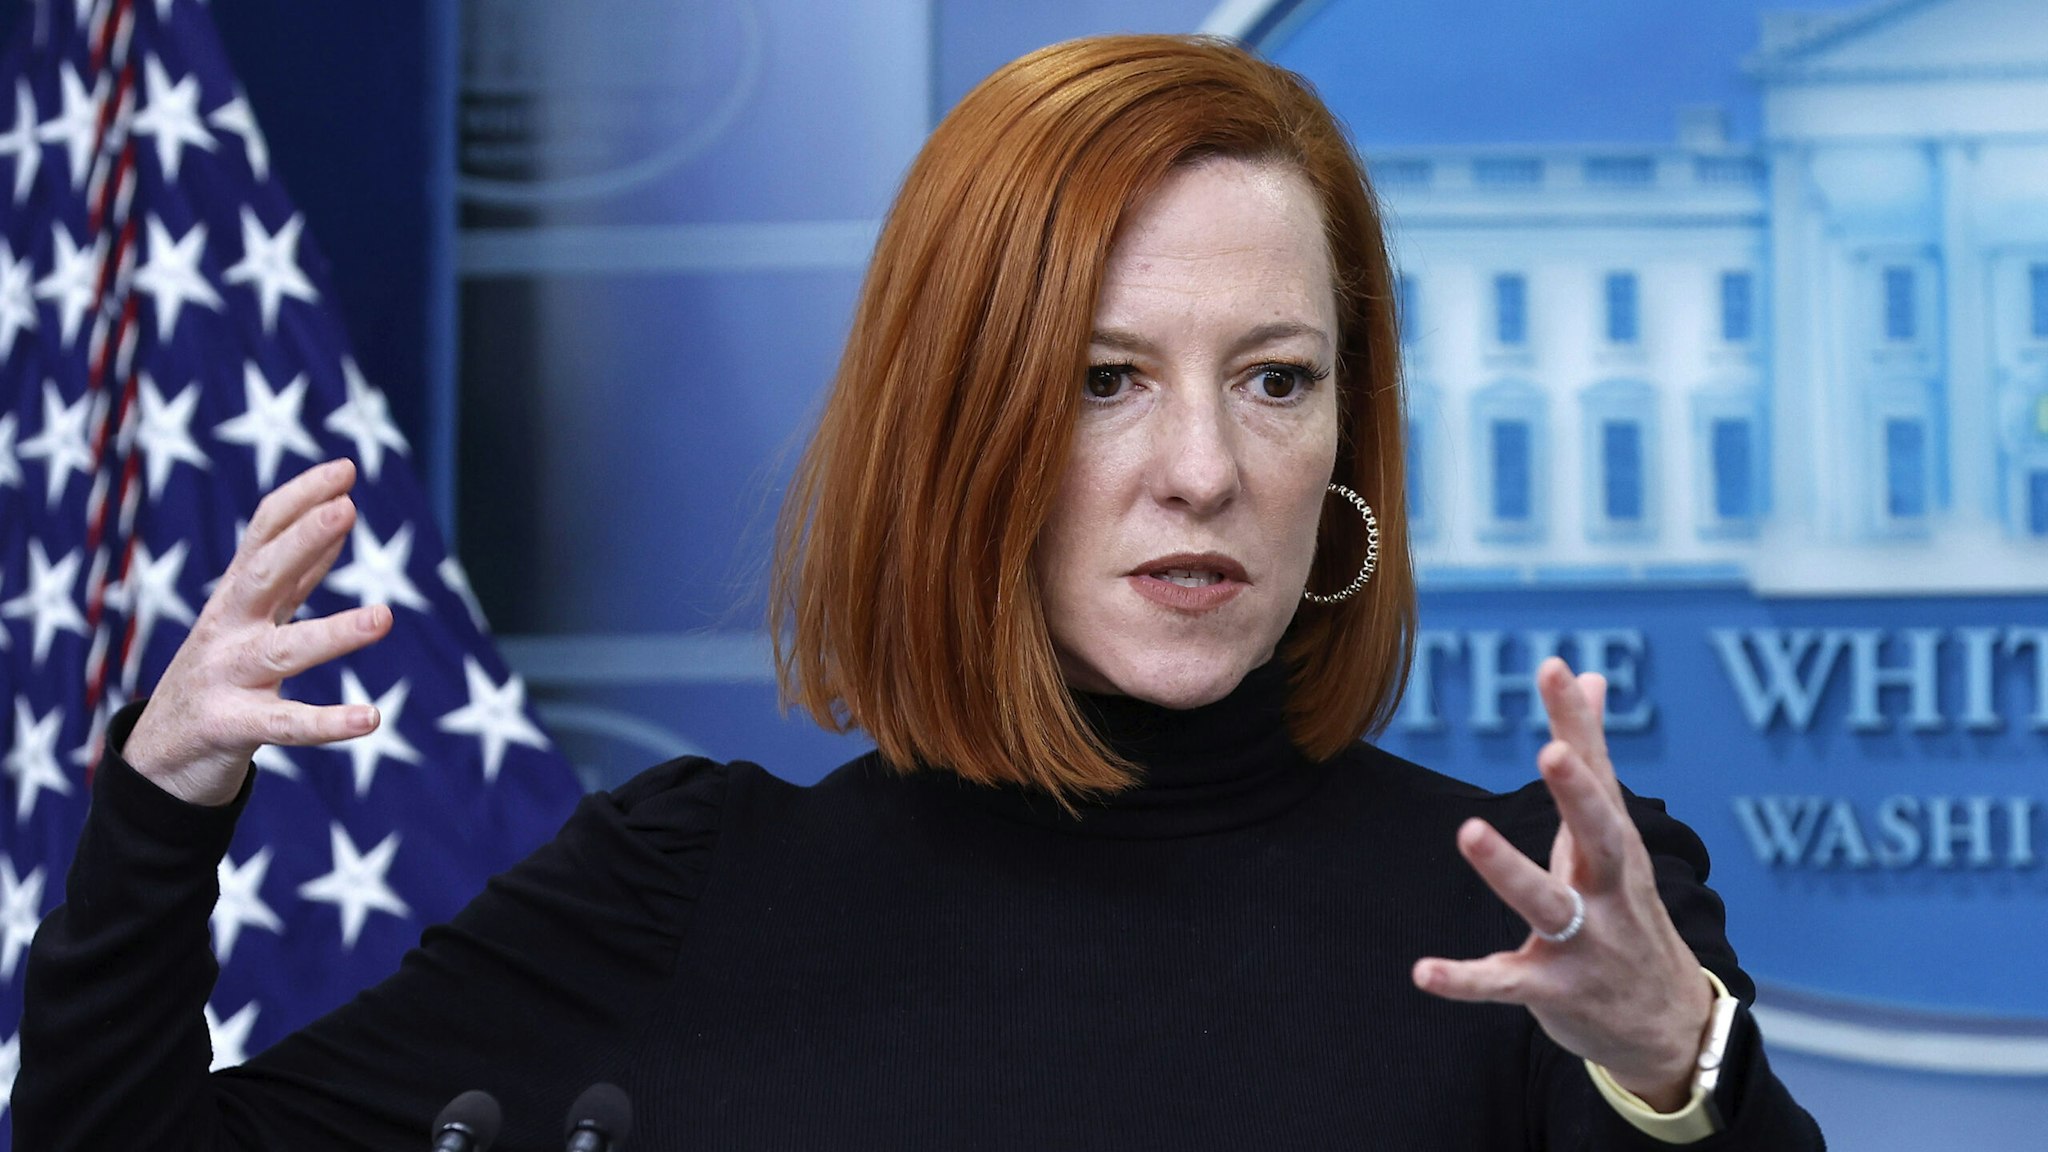 WASHINGTON, DC - JANUARY 21: White House Press Secretary Jen Psaki talks to reporters in the Brady Press Briefing Room at the White House on January 21, 2022 in Washington, DC. Psaki took questions about the announcement by Intel that the company plans to invest $20 billion in Ohio to build the world's biggest computer chipmaking hub.